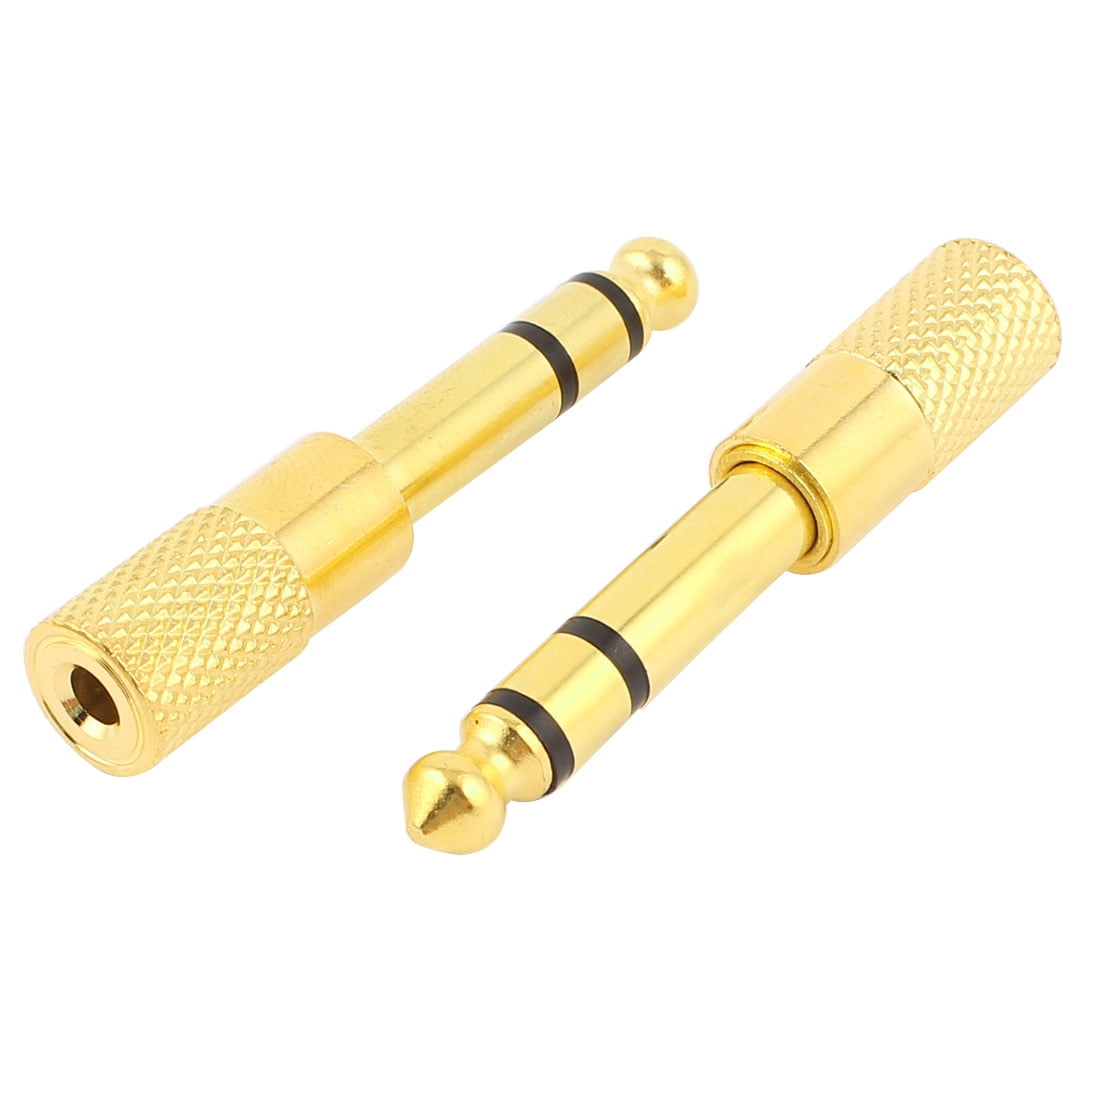 Yellow Cable - Ad06 Adaptateur Jack Stereo Male 3.5 / Jack 6.35